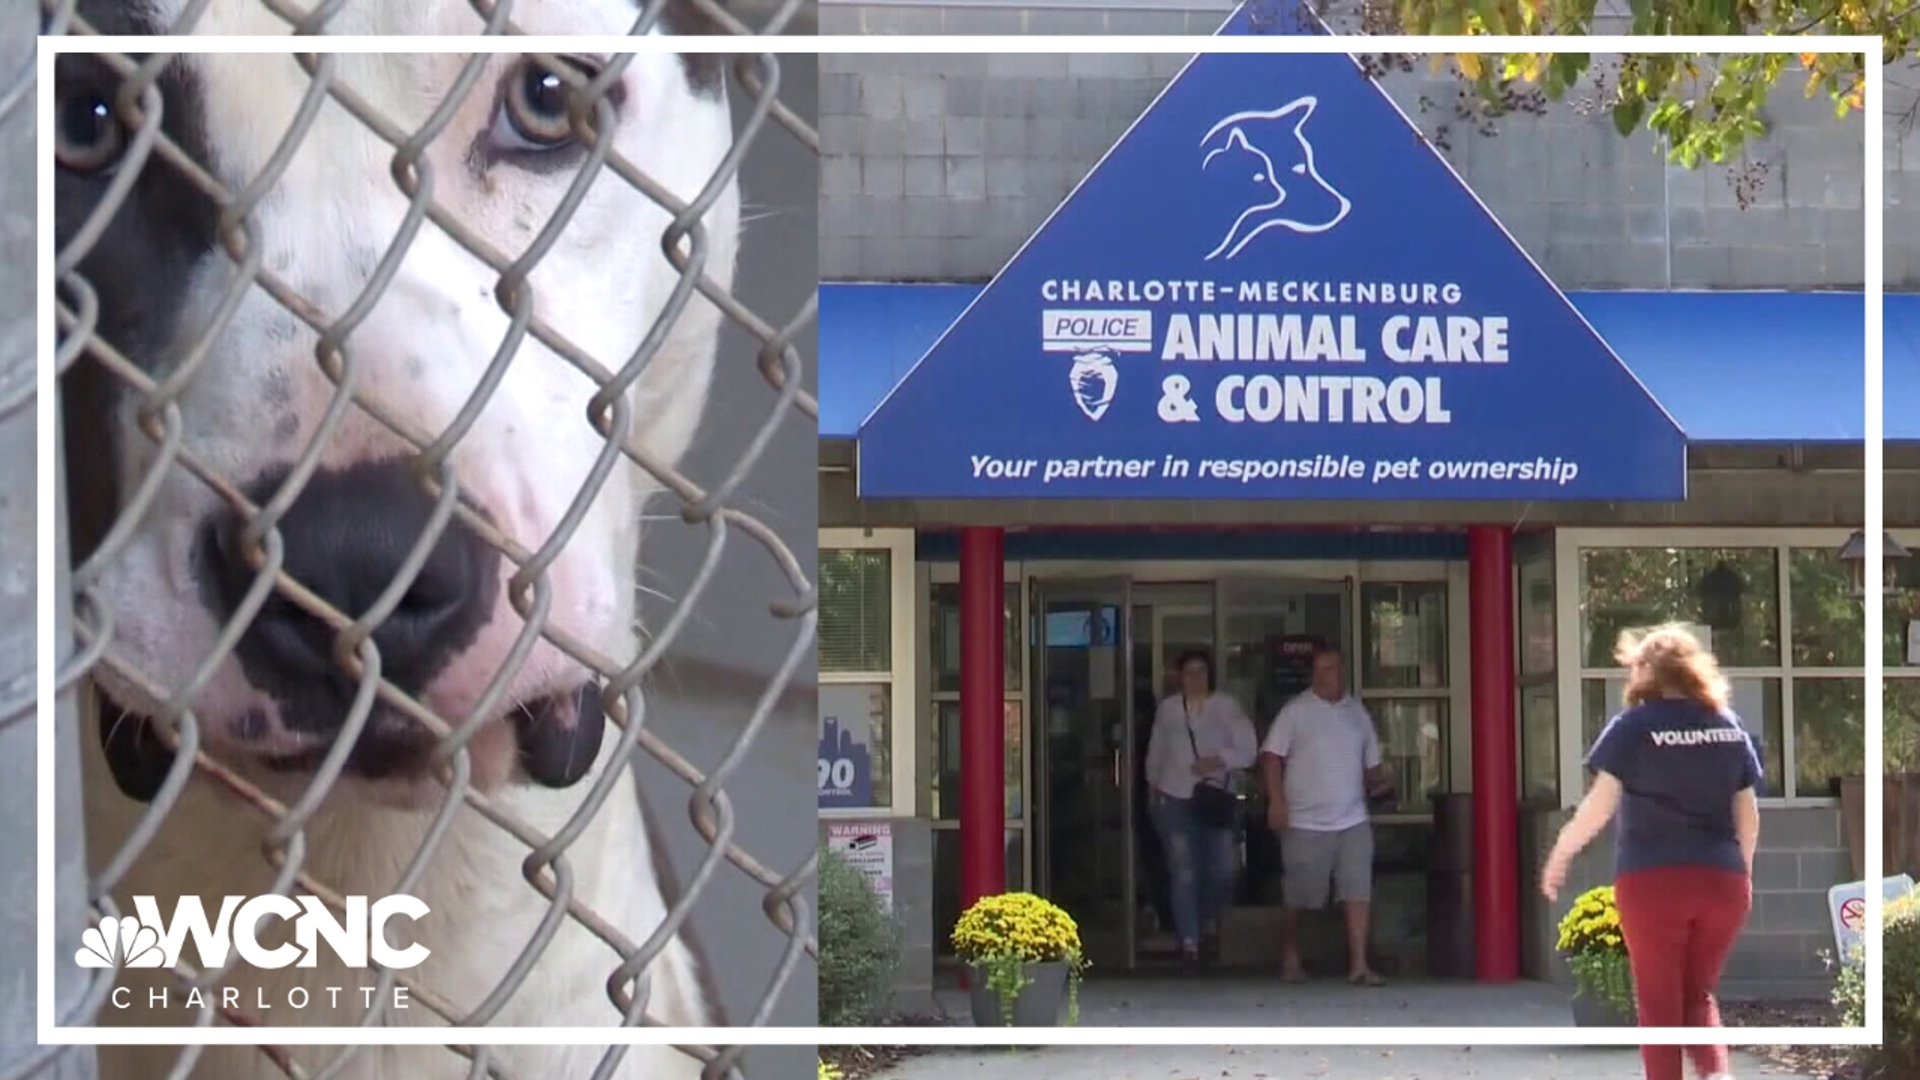 CMPD Animal Care & Control has an update as it works to renovate its shelter.